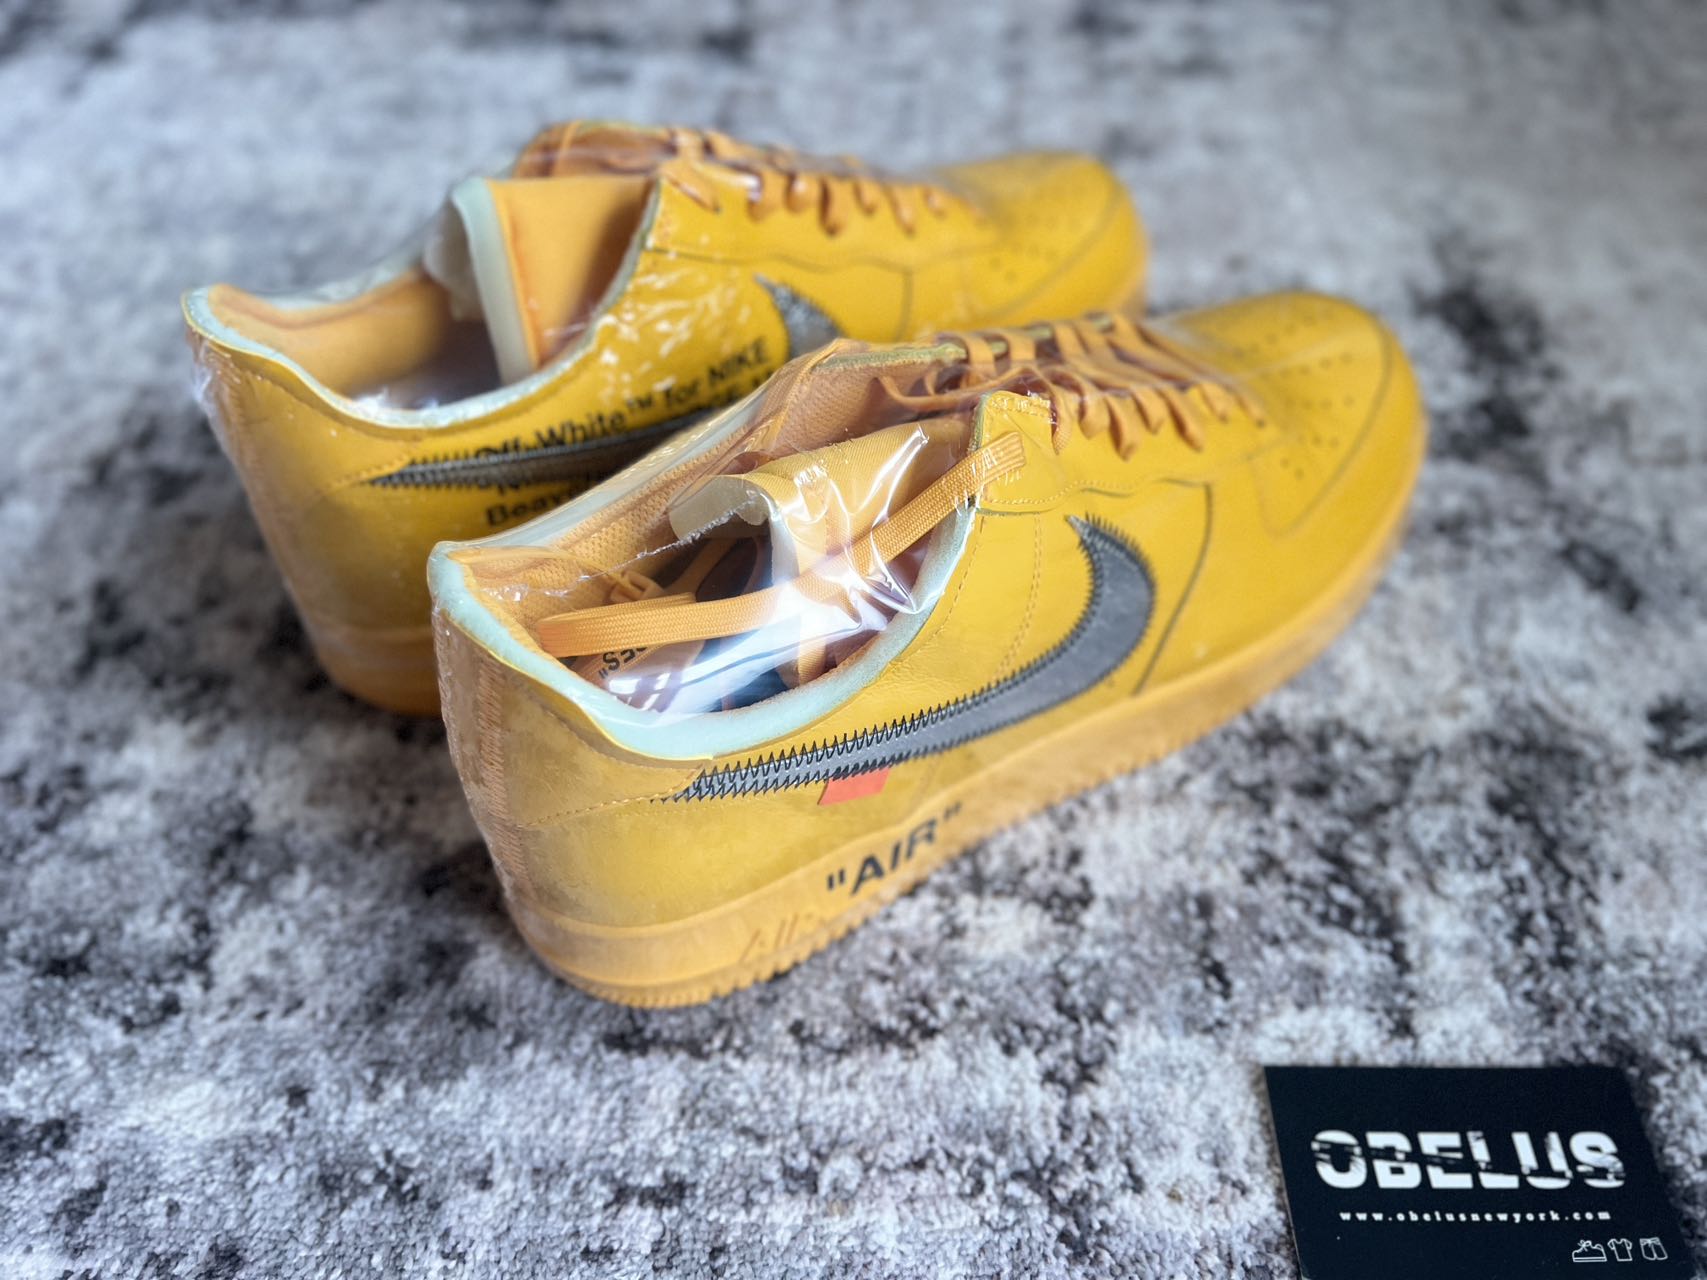 Nike Air Force 1 Low x Off-White™ 'ICA' University Gold